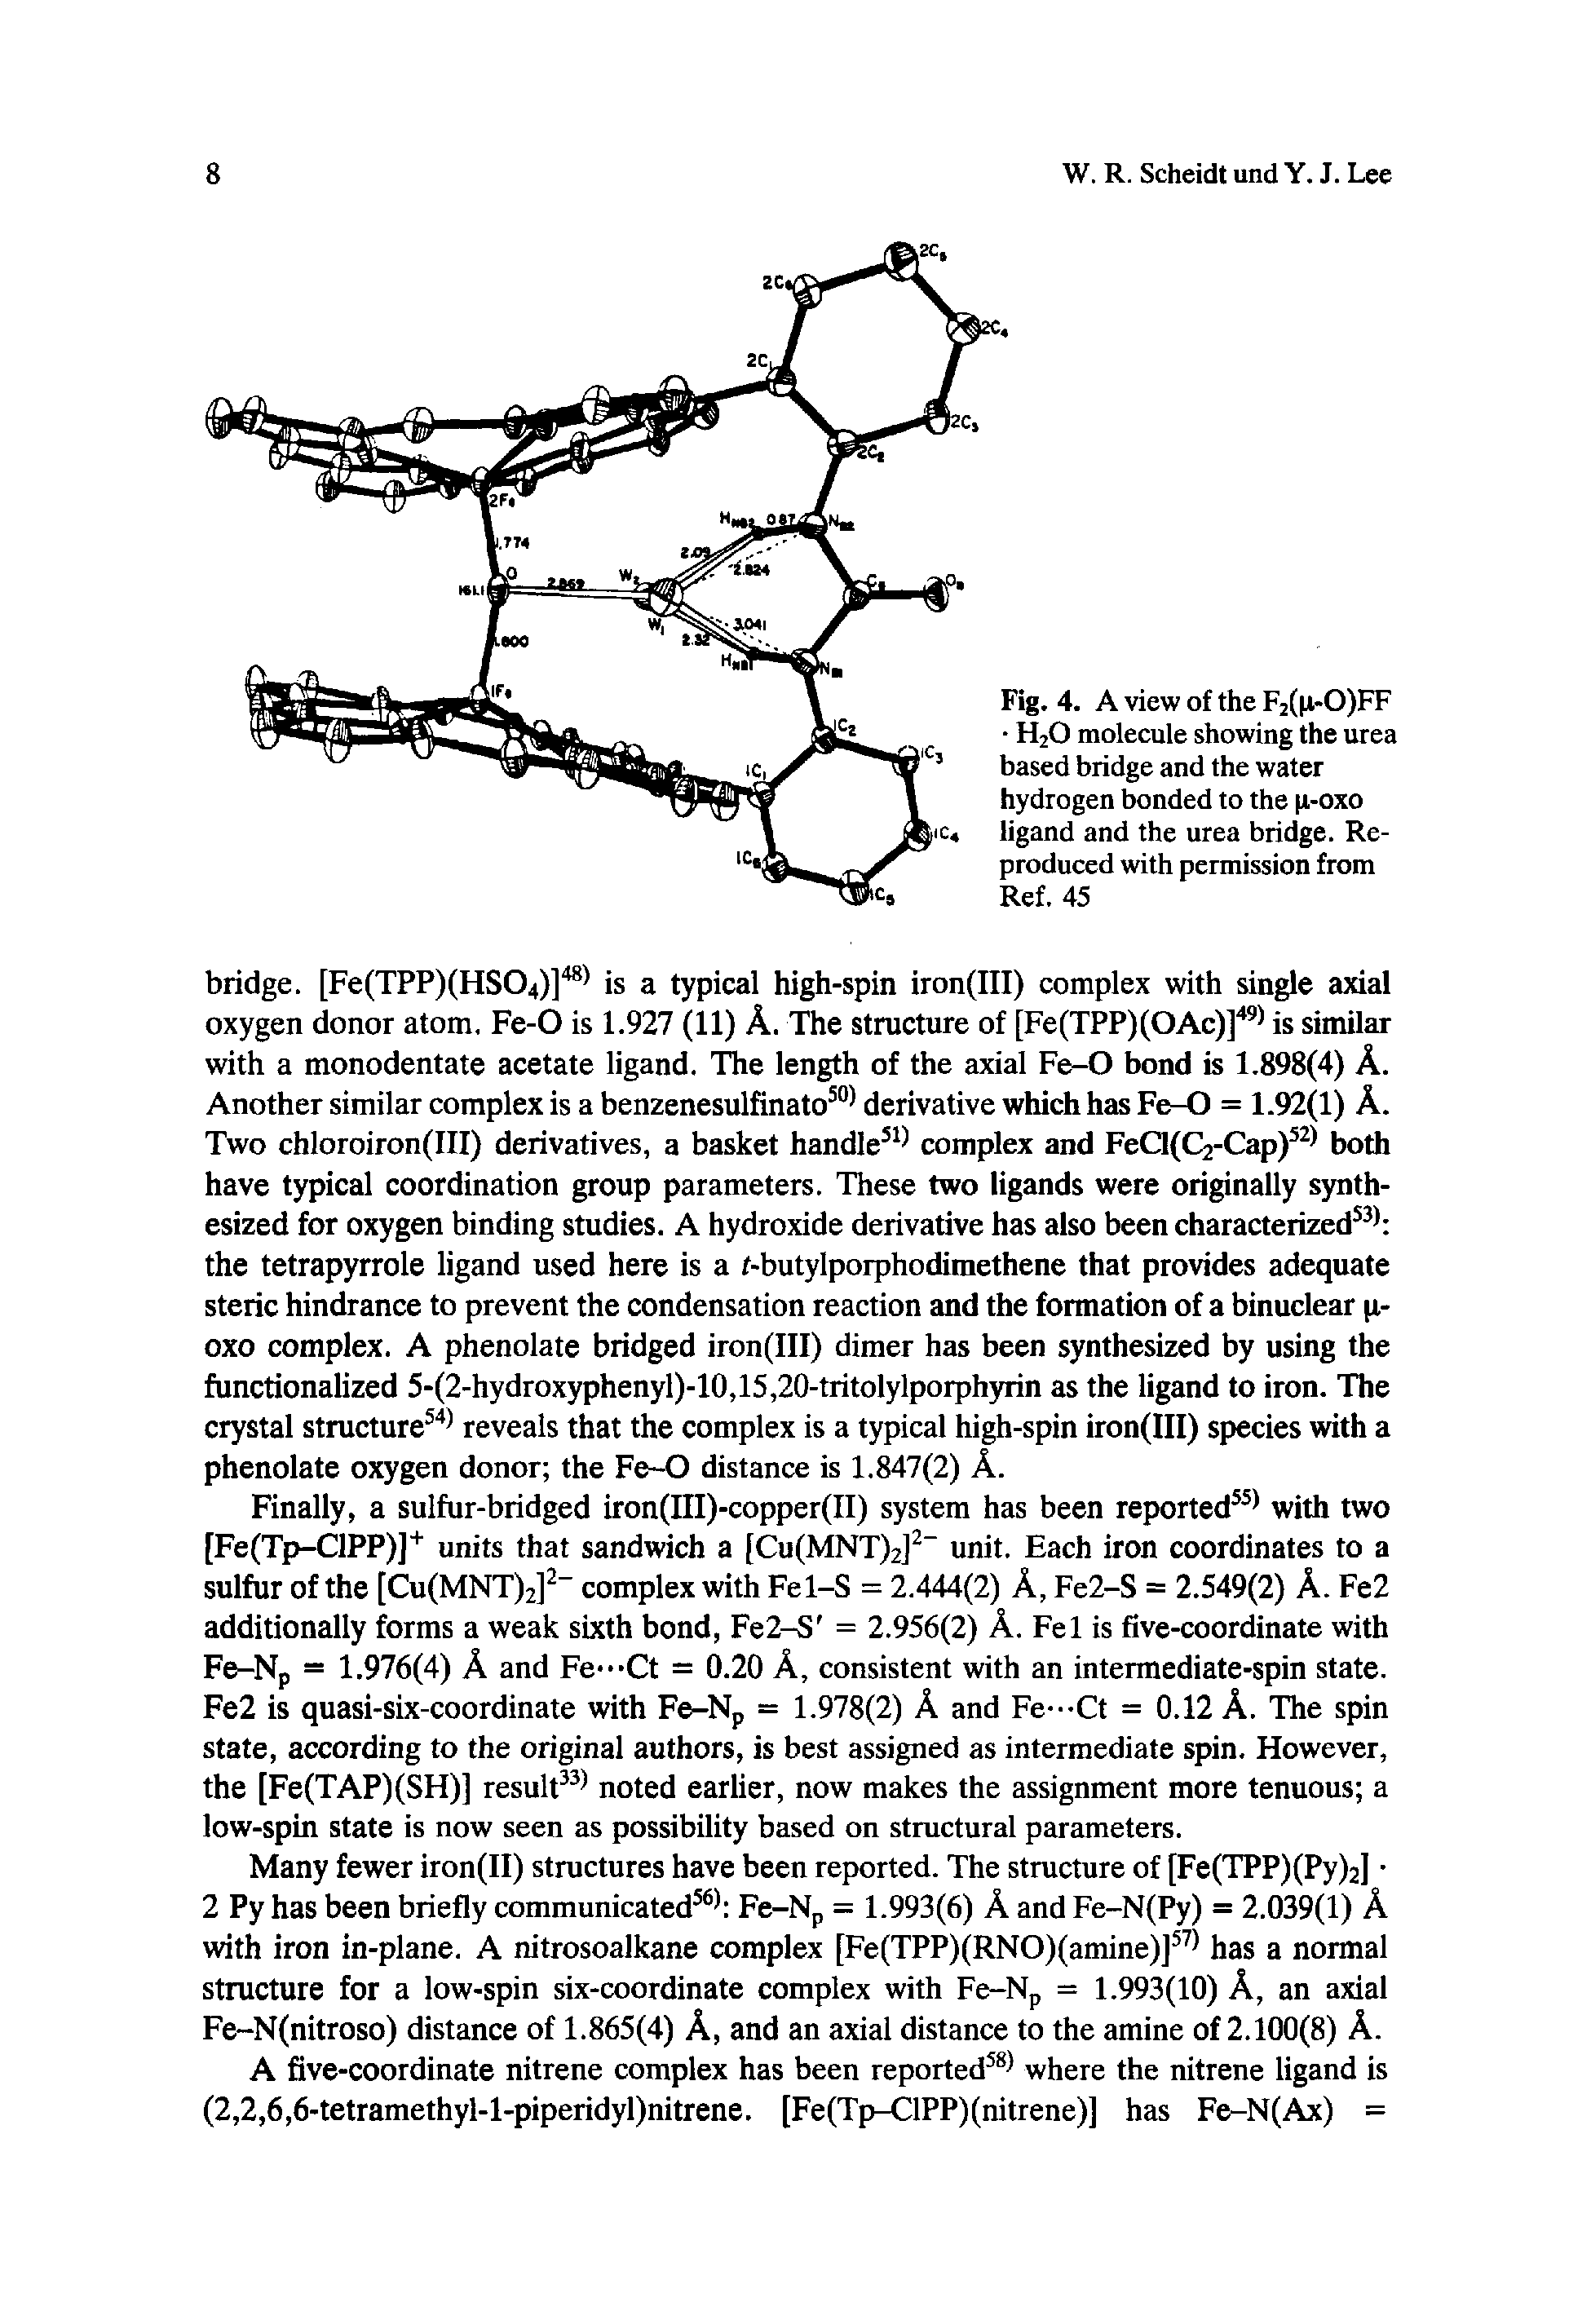 Fig. 4. A view of the F2((i-0)FF H2O molecule showing the urea based bridge and the water hydrogen bonded to the [i-oxo ligand and the urea bridge. Reproduced with permission from Ref. 45...